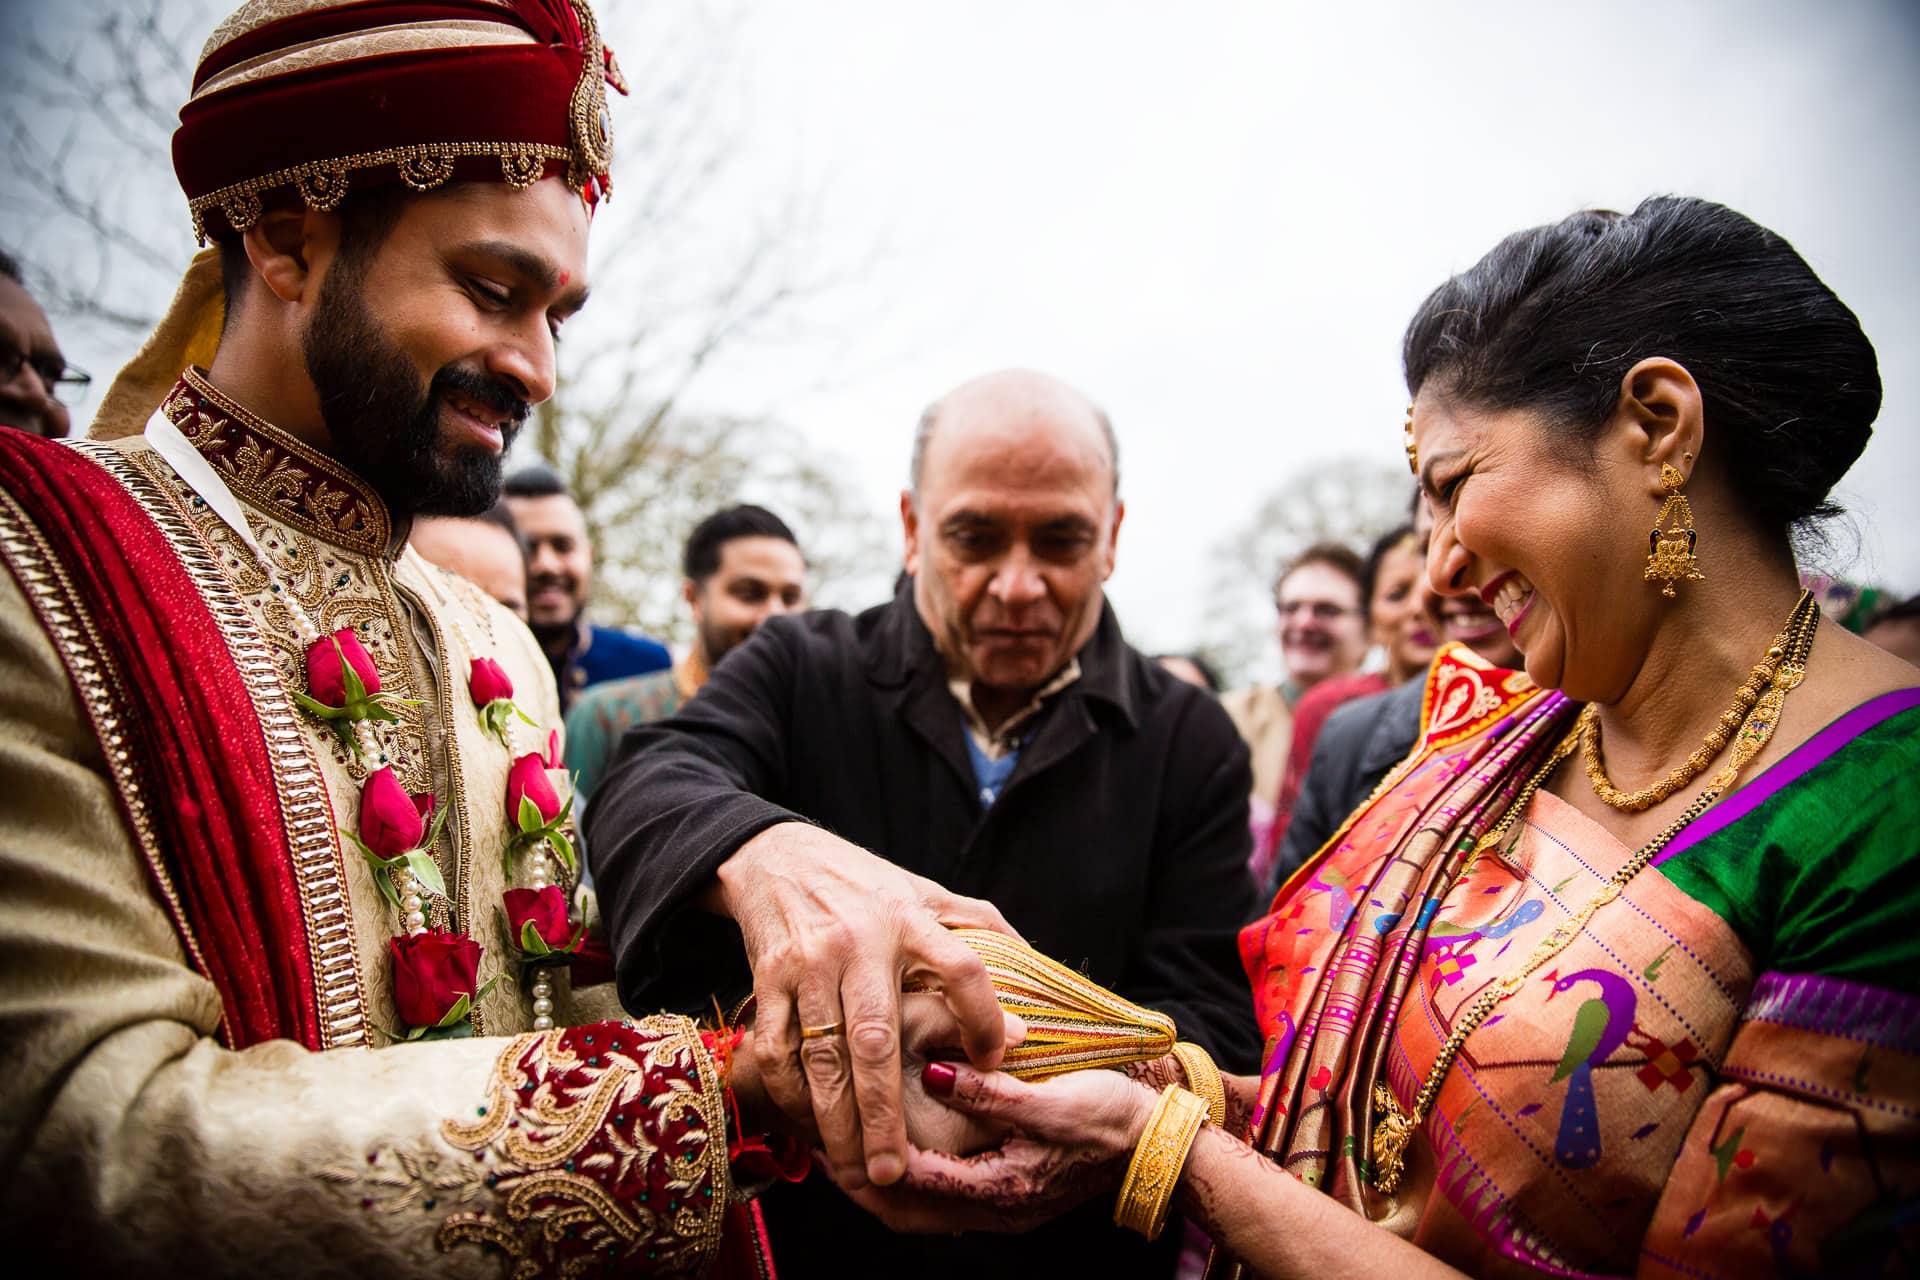 Exchanging of coconuts during Hindu wedding